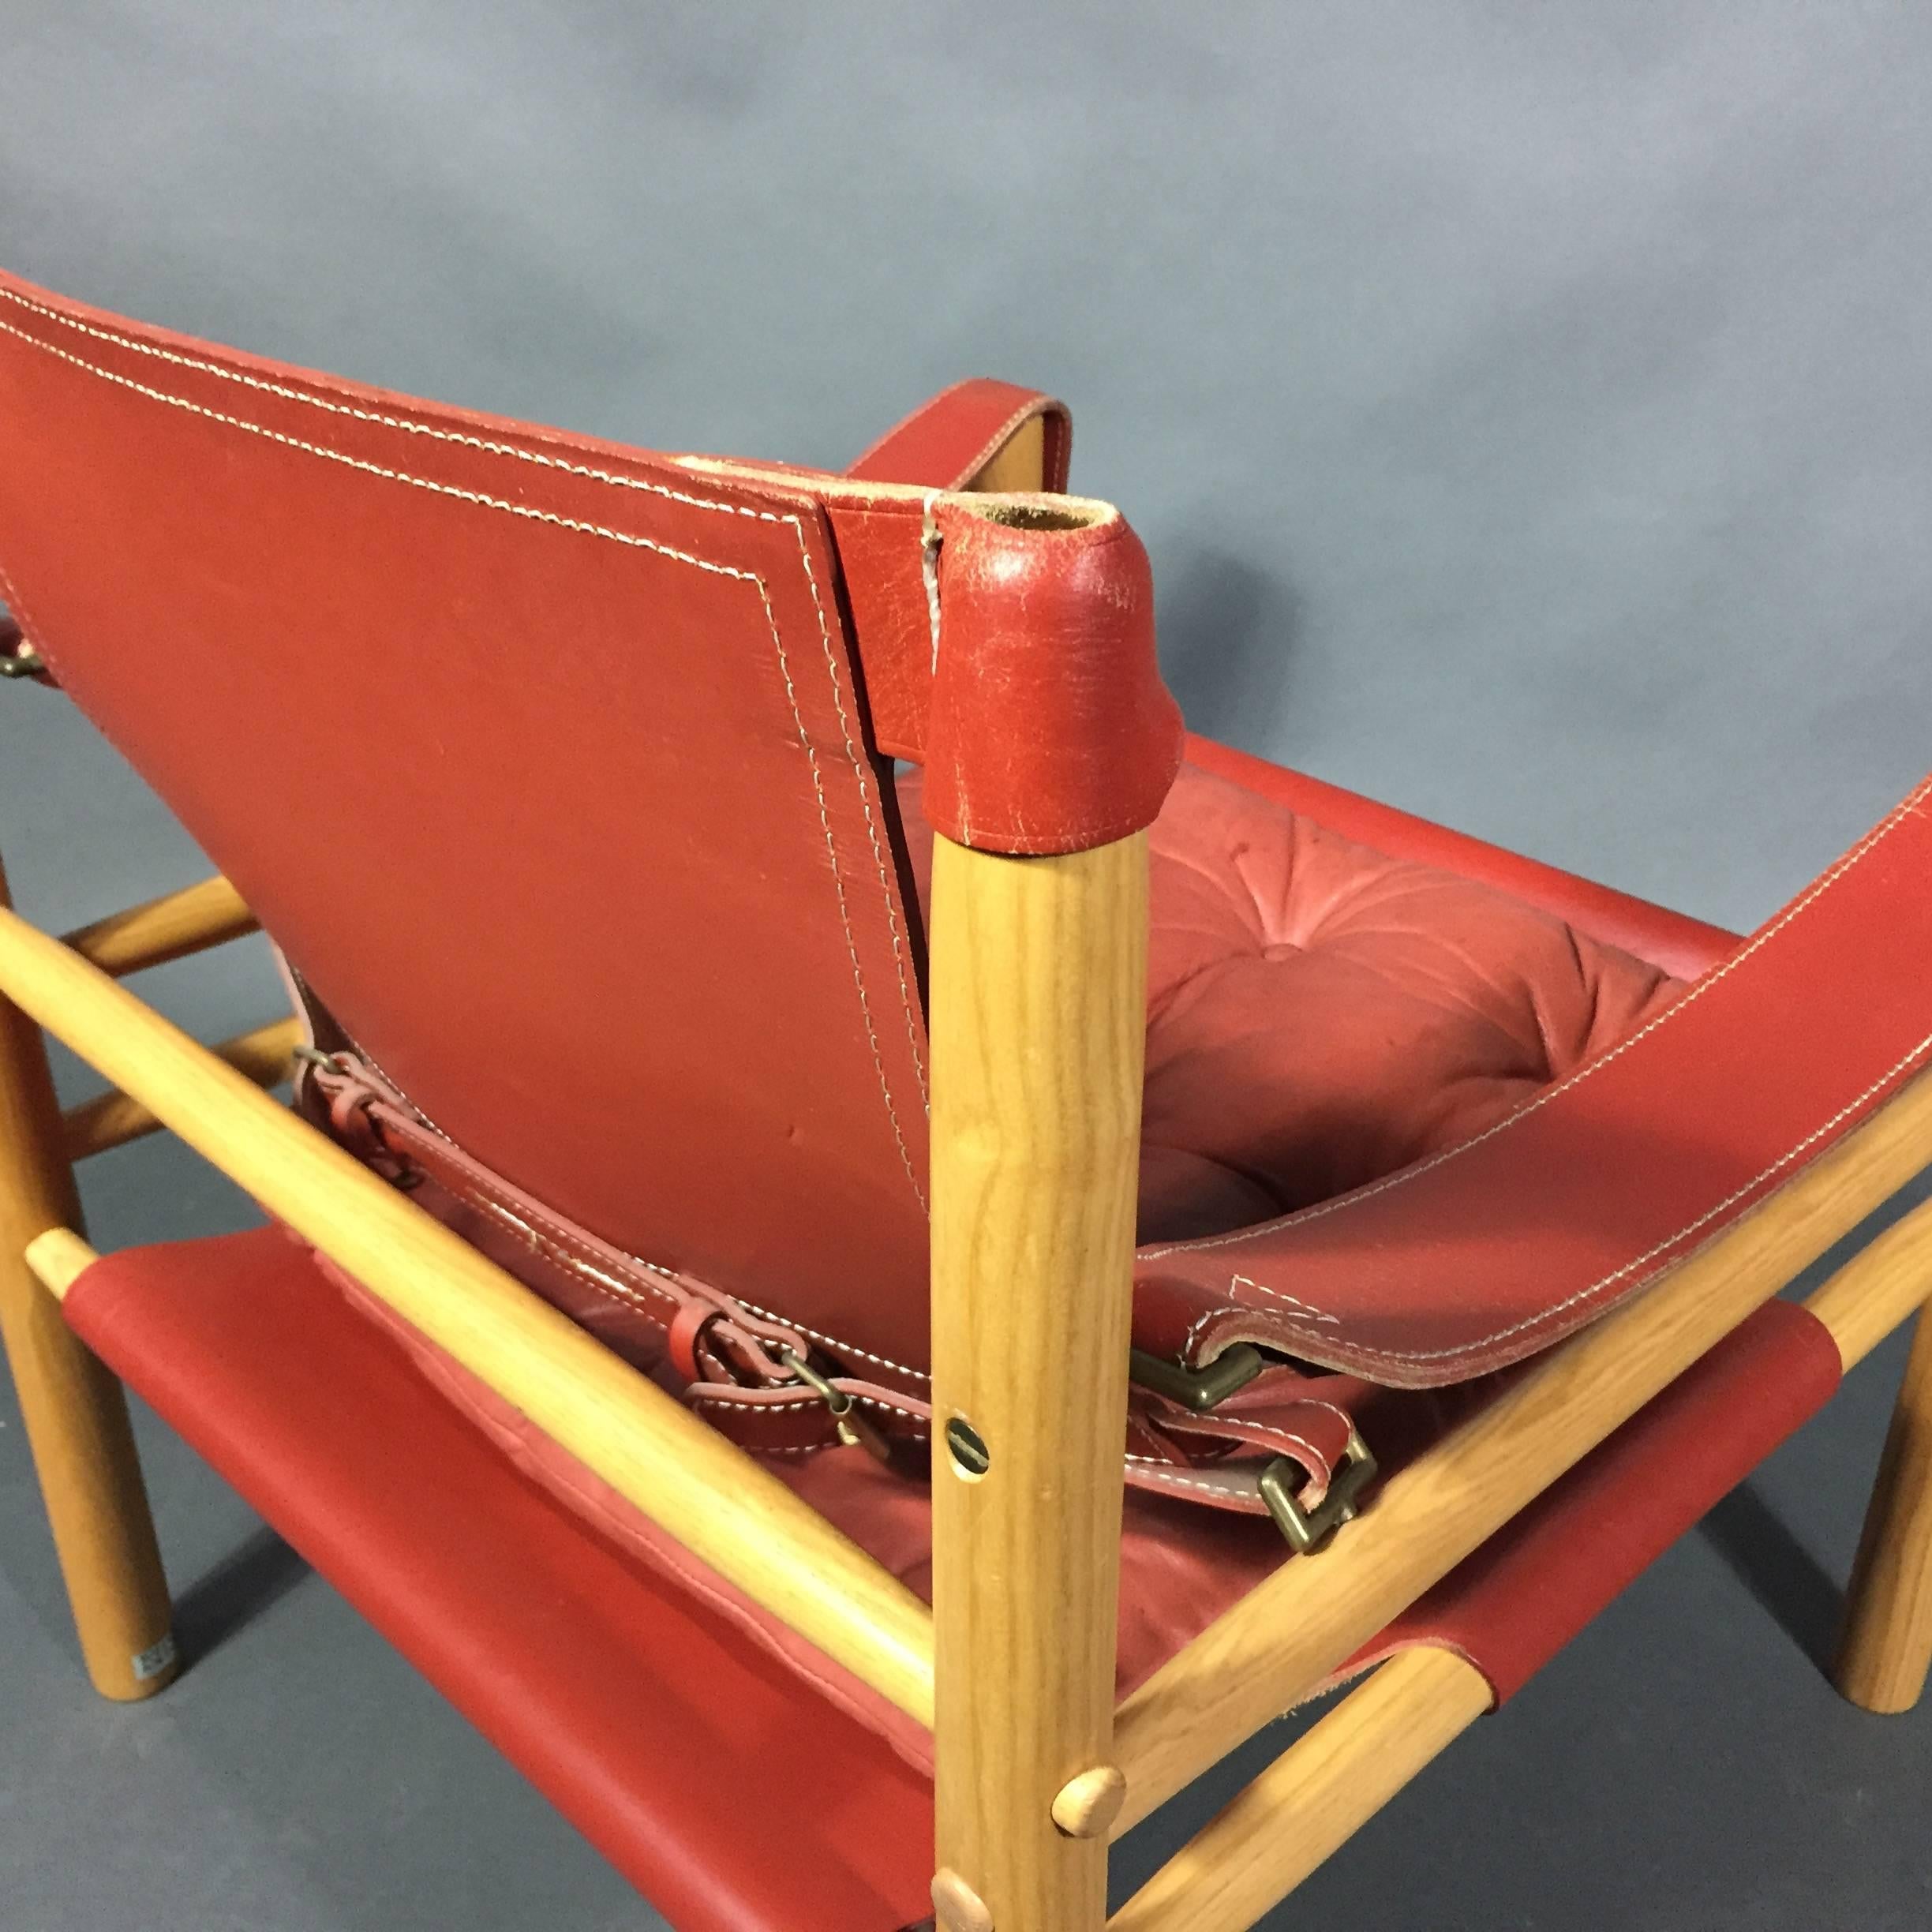 Pair of Arne Norell Red or Orange Leather Sirocco Chairs, Sweden For Sale 3